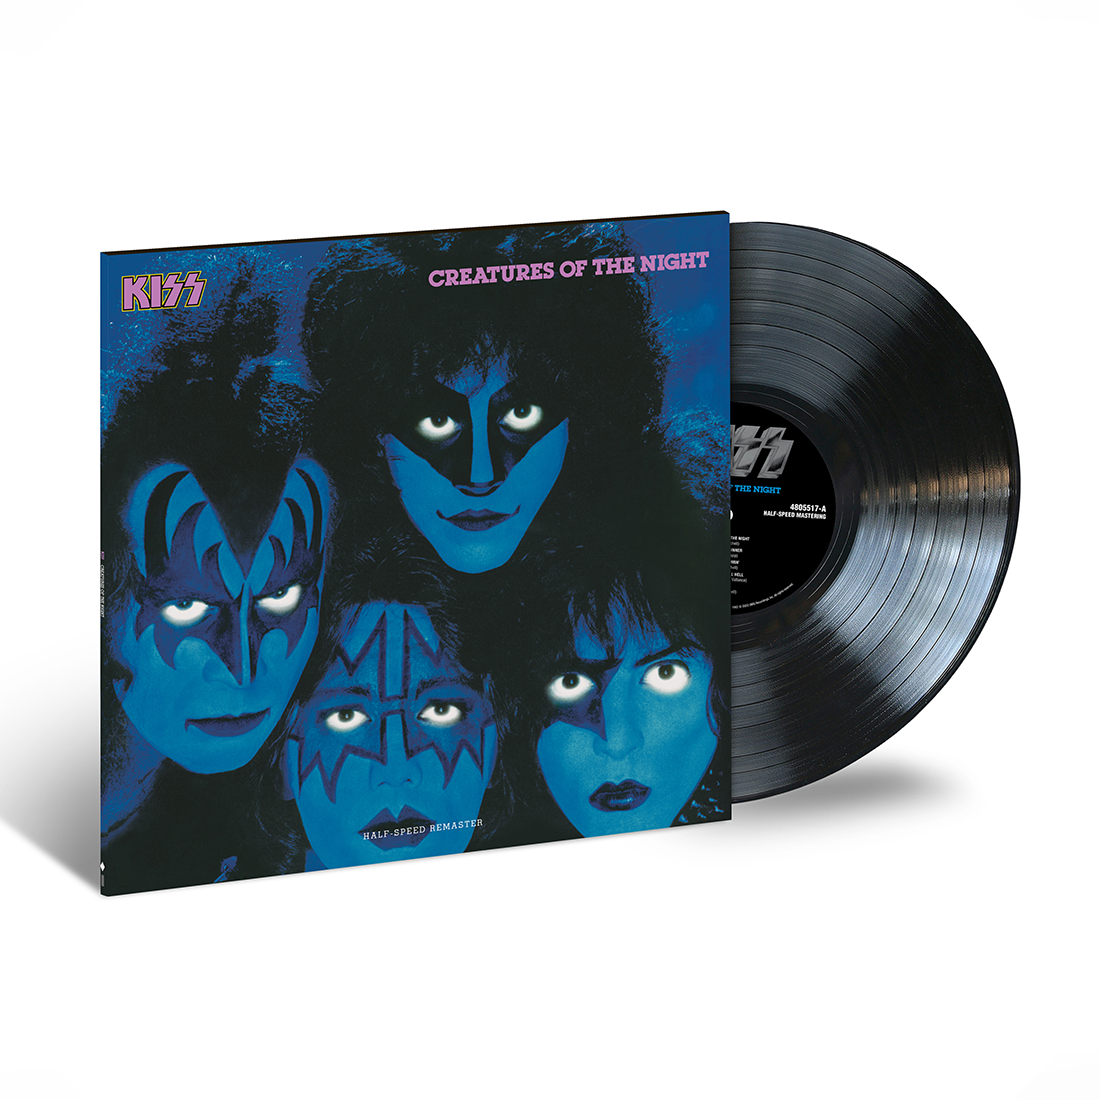 Kiss - Creatures Of The Night - 40th Anniversary Edition: Half-Speed Mastered Vinyl LP